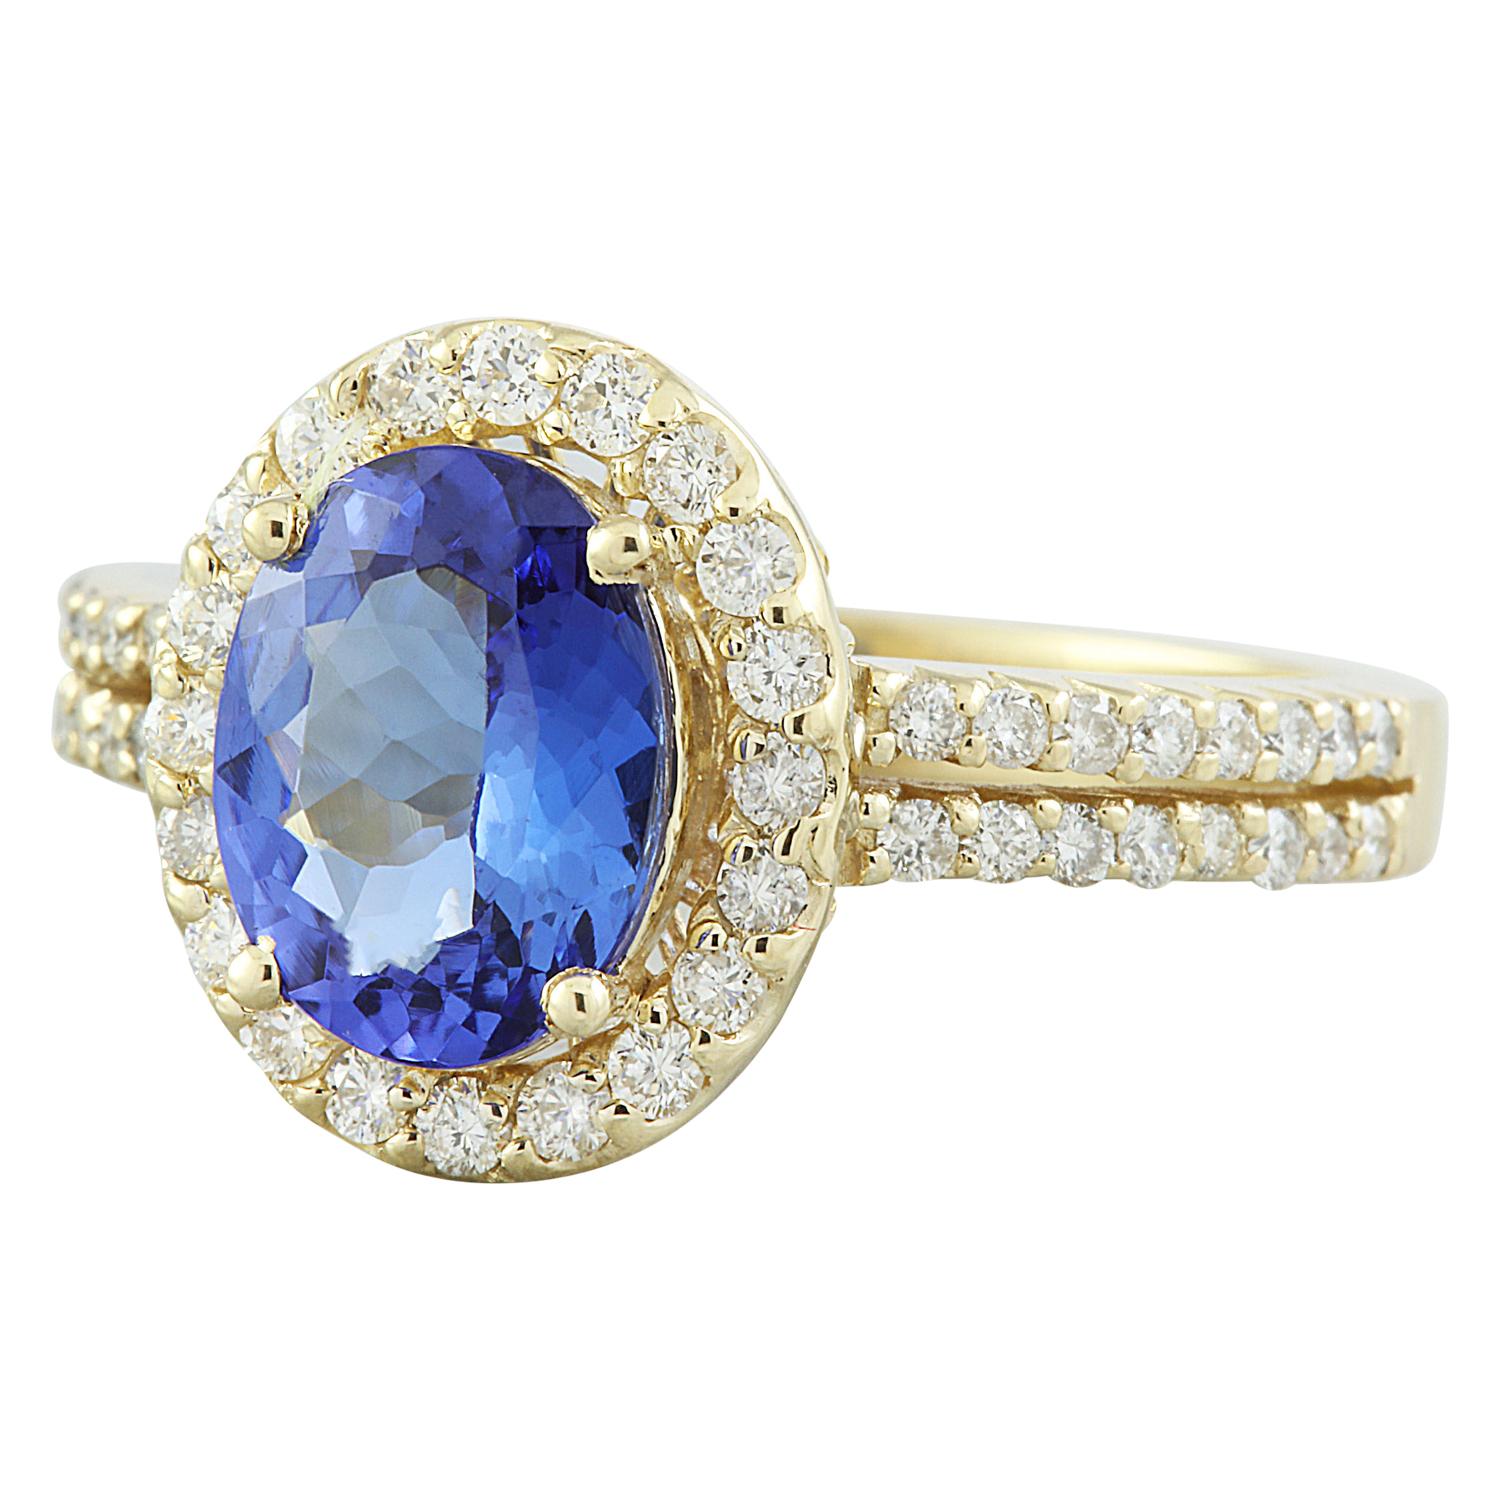 Discover the unparalleled beauty of this Natural Tanzanite Diamond Ring, a true masterpiece crafted in solid 14K Yellow Gold. Weighing a total of 2.34 carats, this ring embodies elegance and sophistication, destined to adorn the hand of a discerning